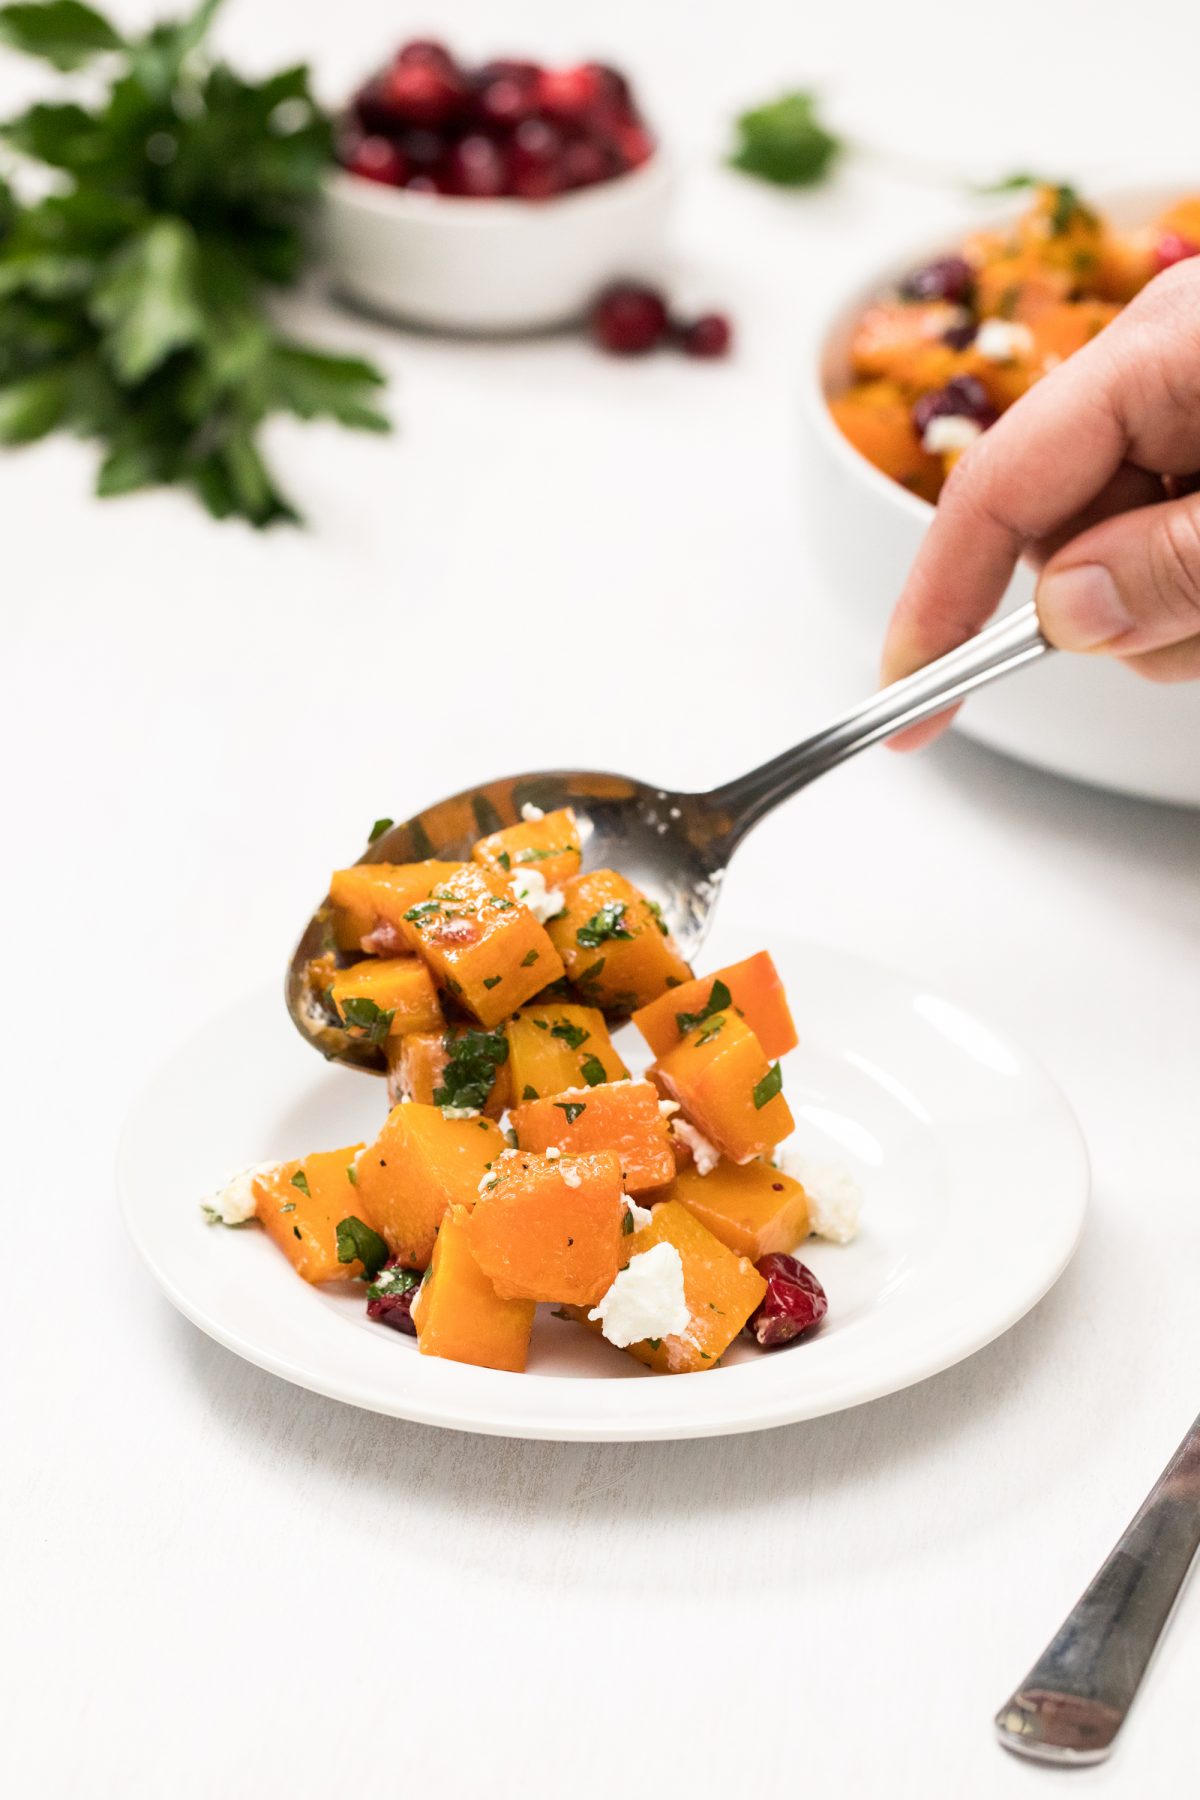 Maple-balsamic roasted butternut squash with garlic